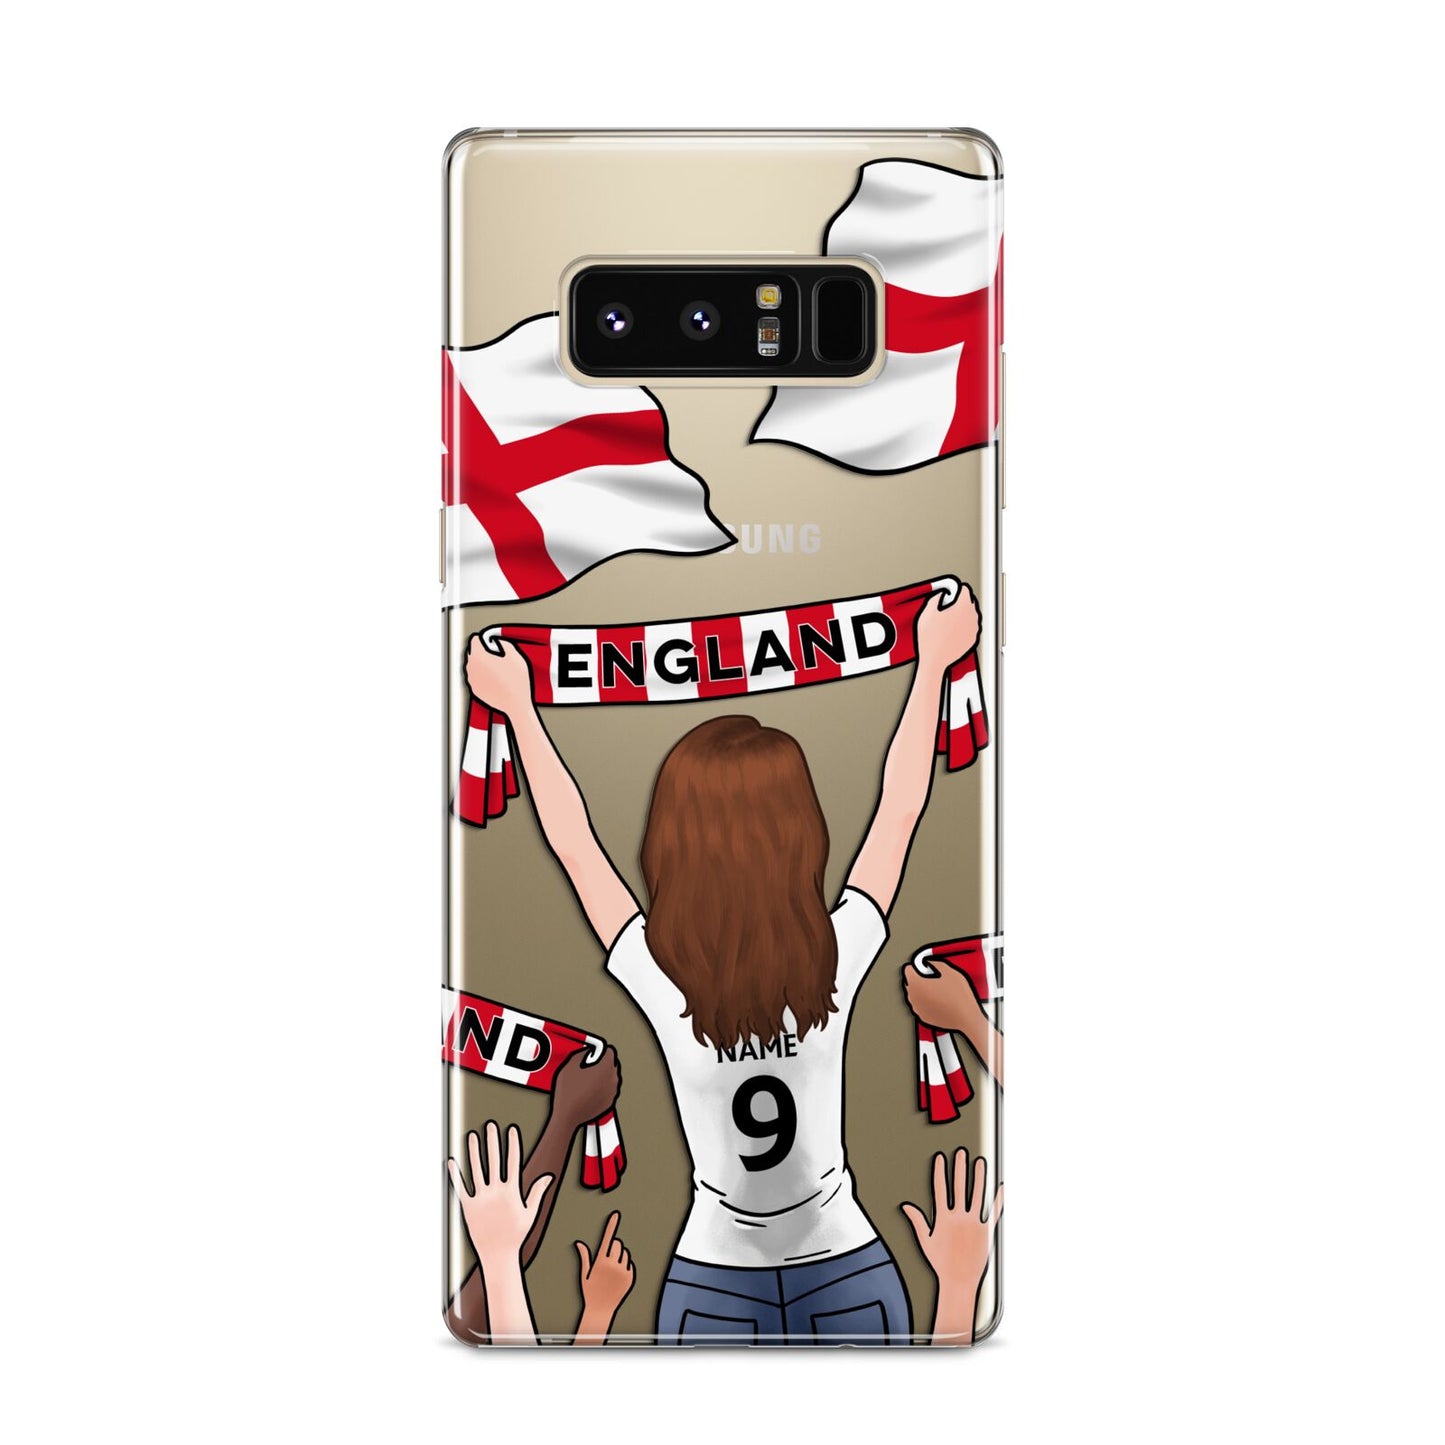 Football Supporter Personalised Samsung Galaxy S8 Case